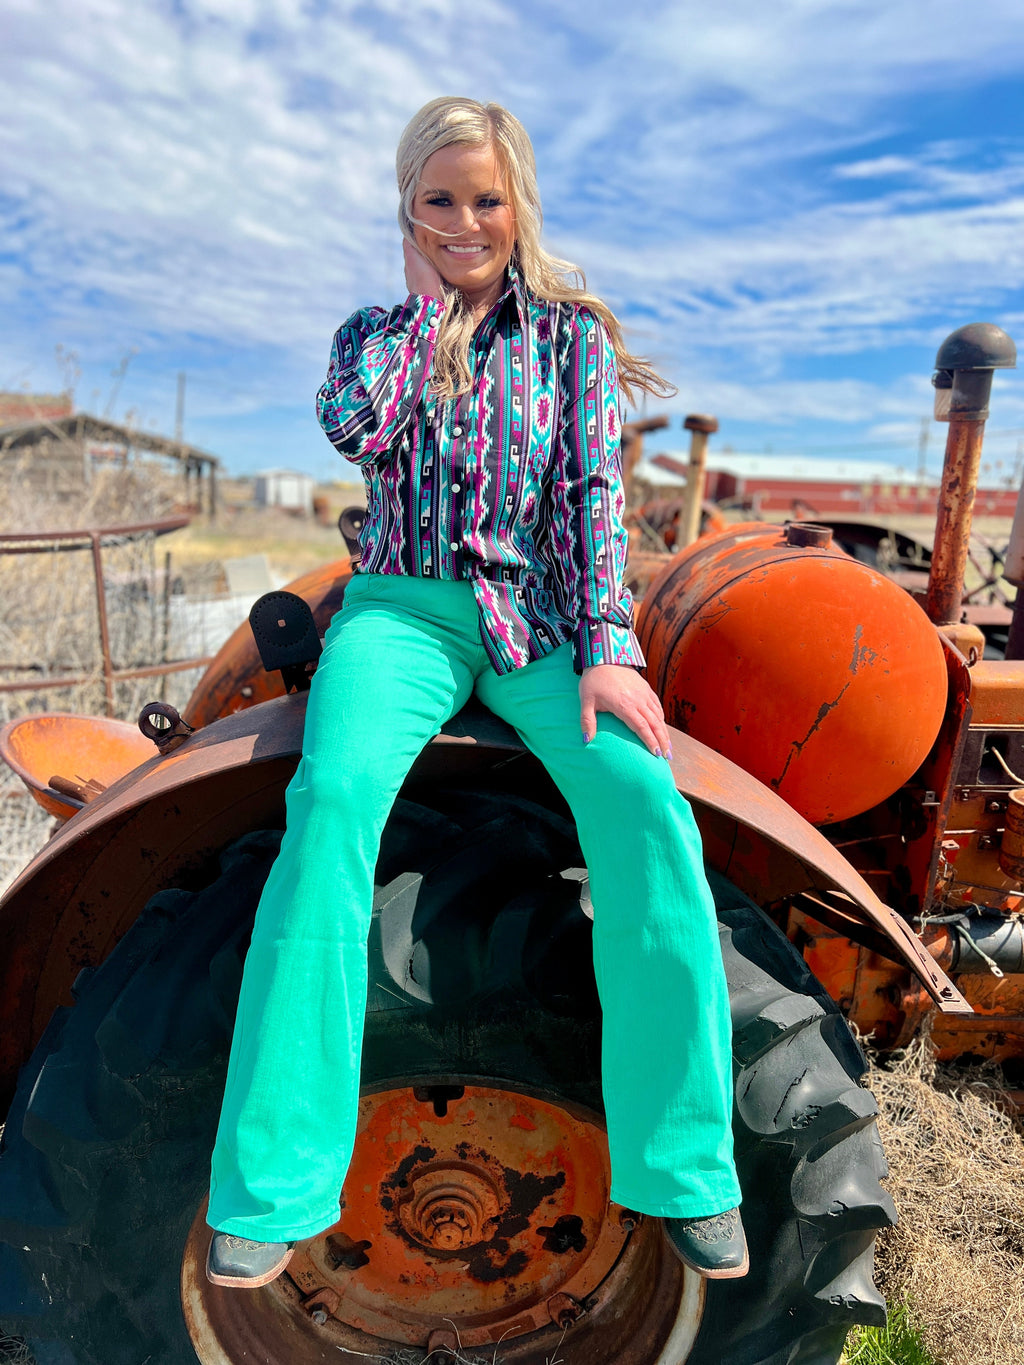 Sterling Kreek Denim. Turquoise denim bootcut jeans. Western style jeans. Western style. Colored denim jeans. Vintage inspired western denim. Long inseam turquoise denim jeans. Women's western boutique. Women's western wear. Small business. Woman owned. Online boutique. Fast shipping from Texas.